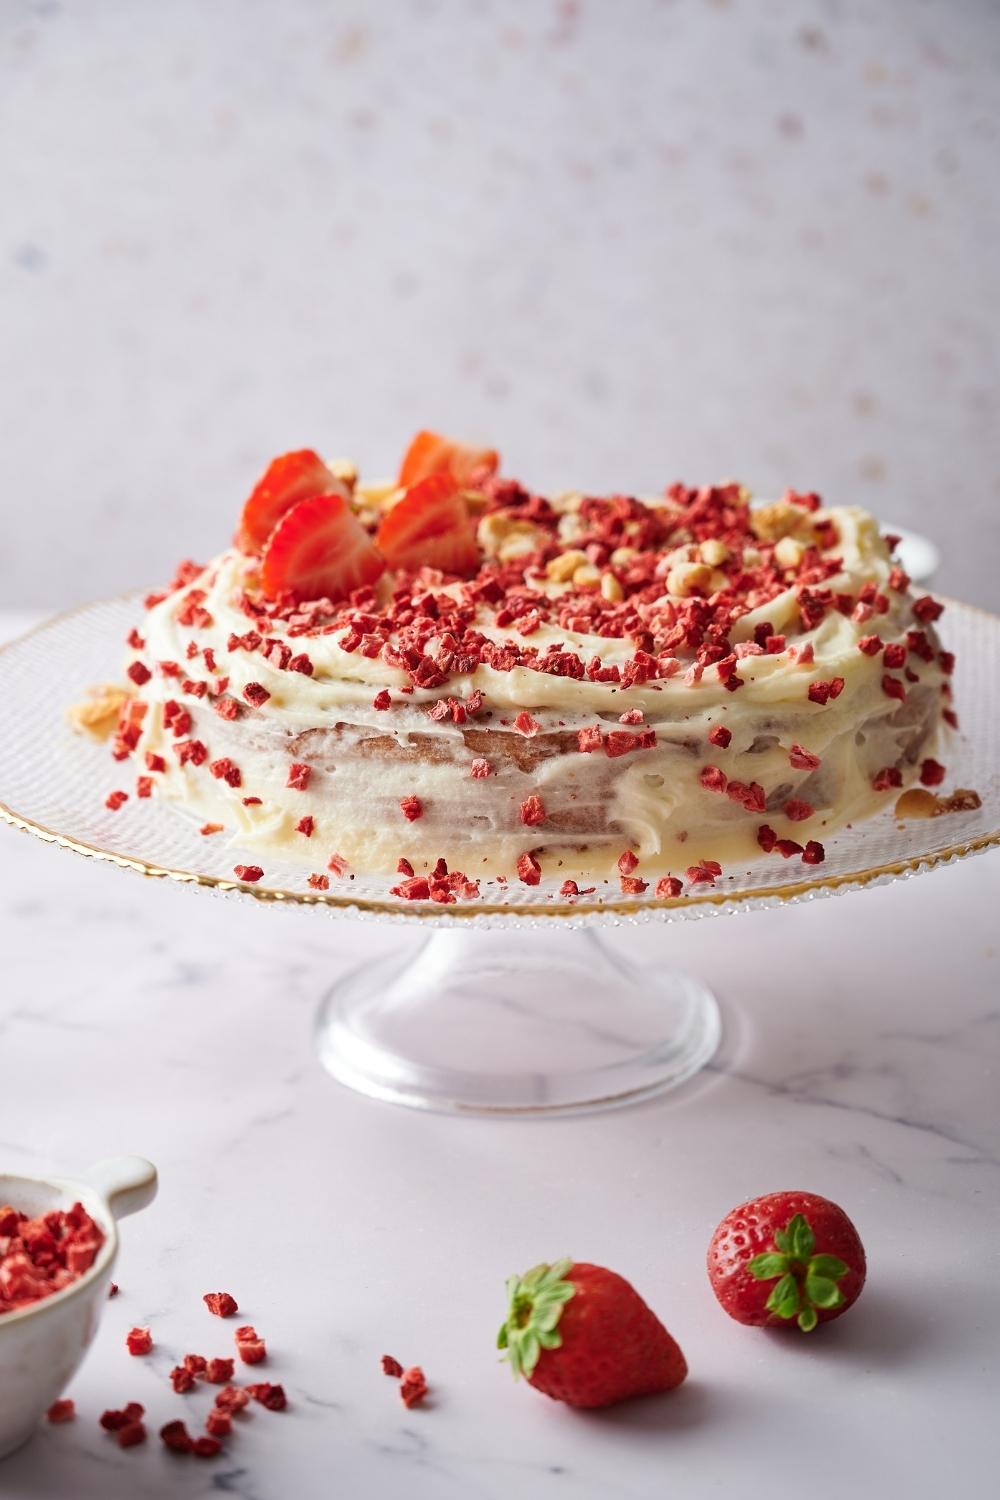 On a cake stand sits a whole strawberry cake on a serving plate. It's topped with dried strawberries, crumbled cookies, frosting and fresh sliced strawberries.